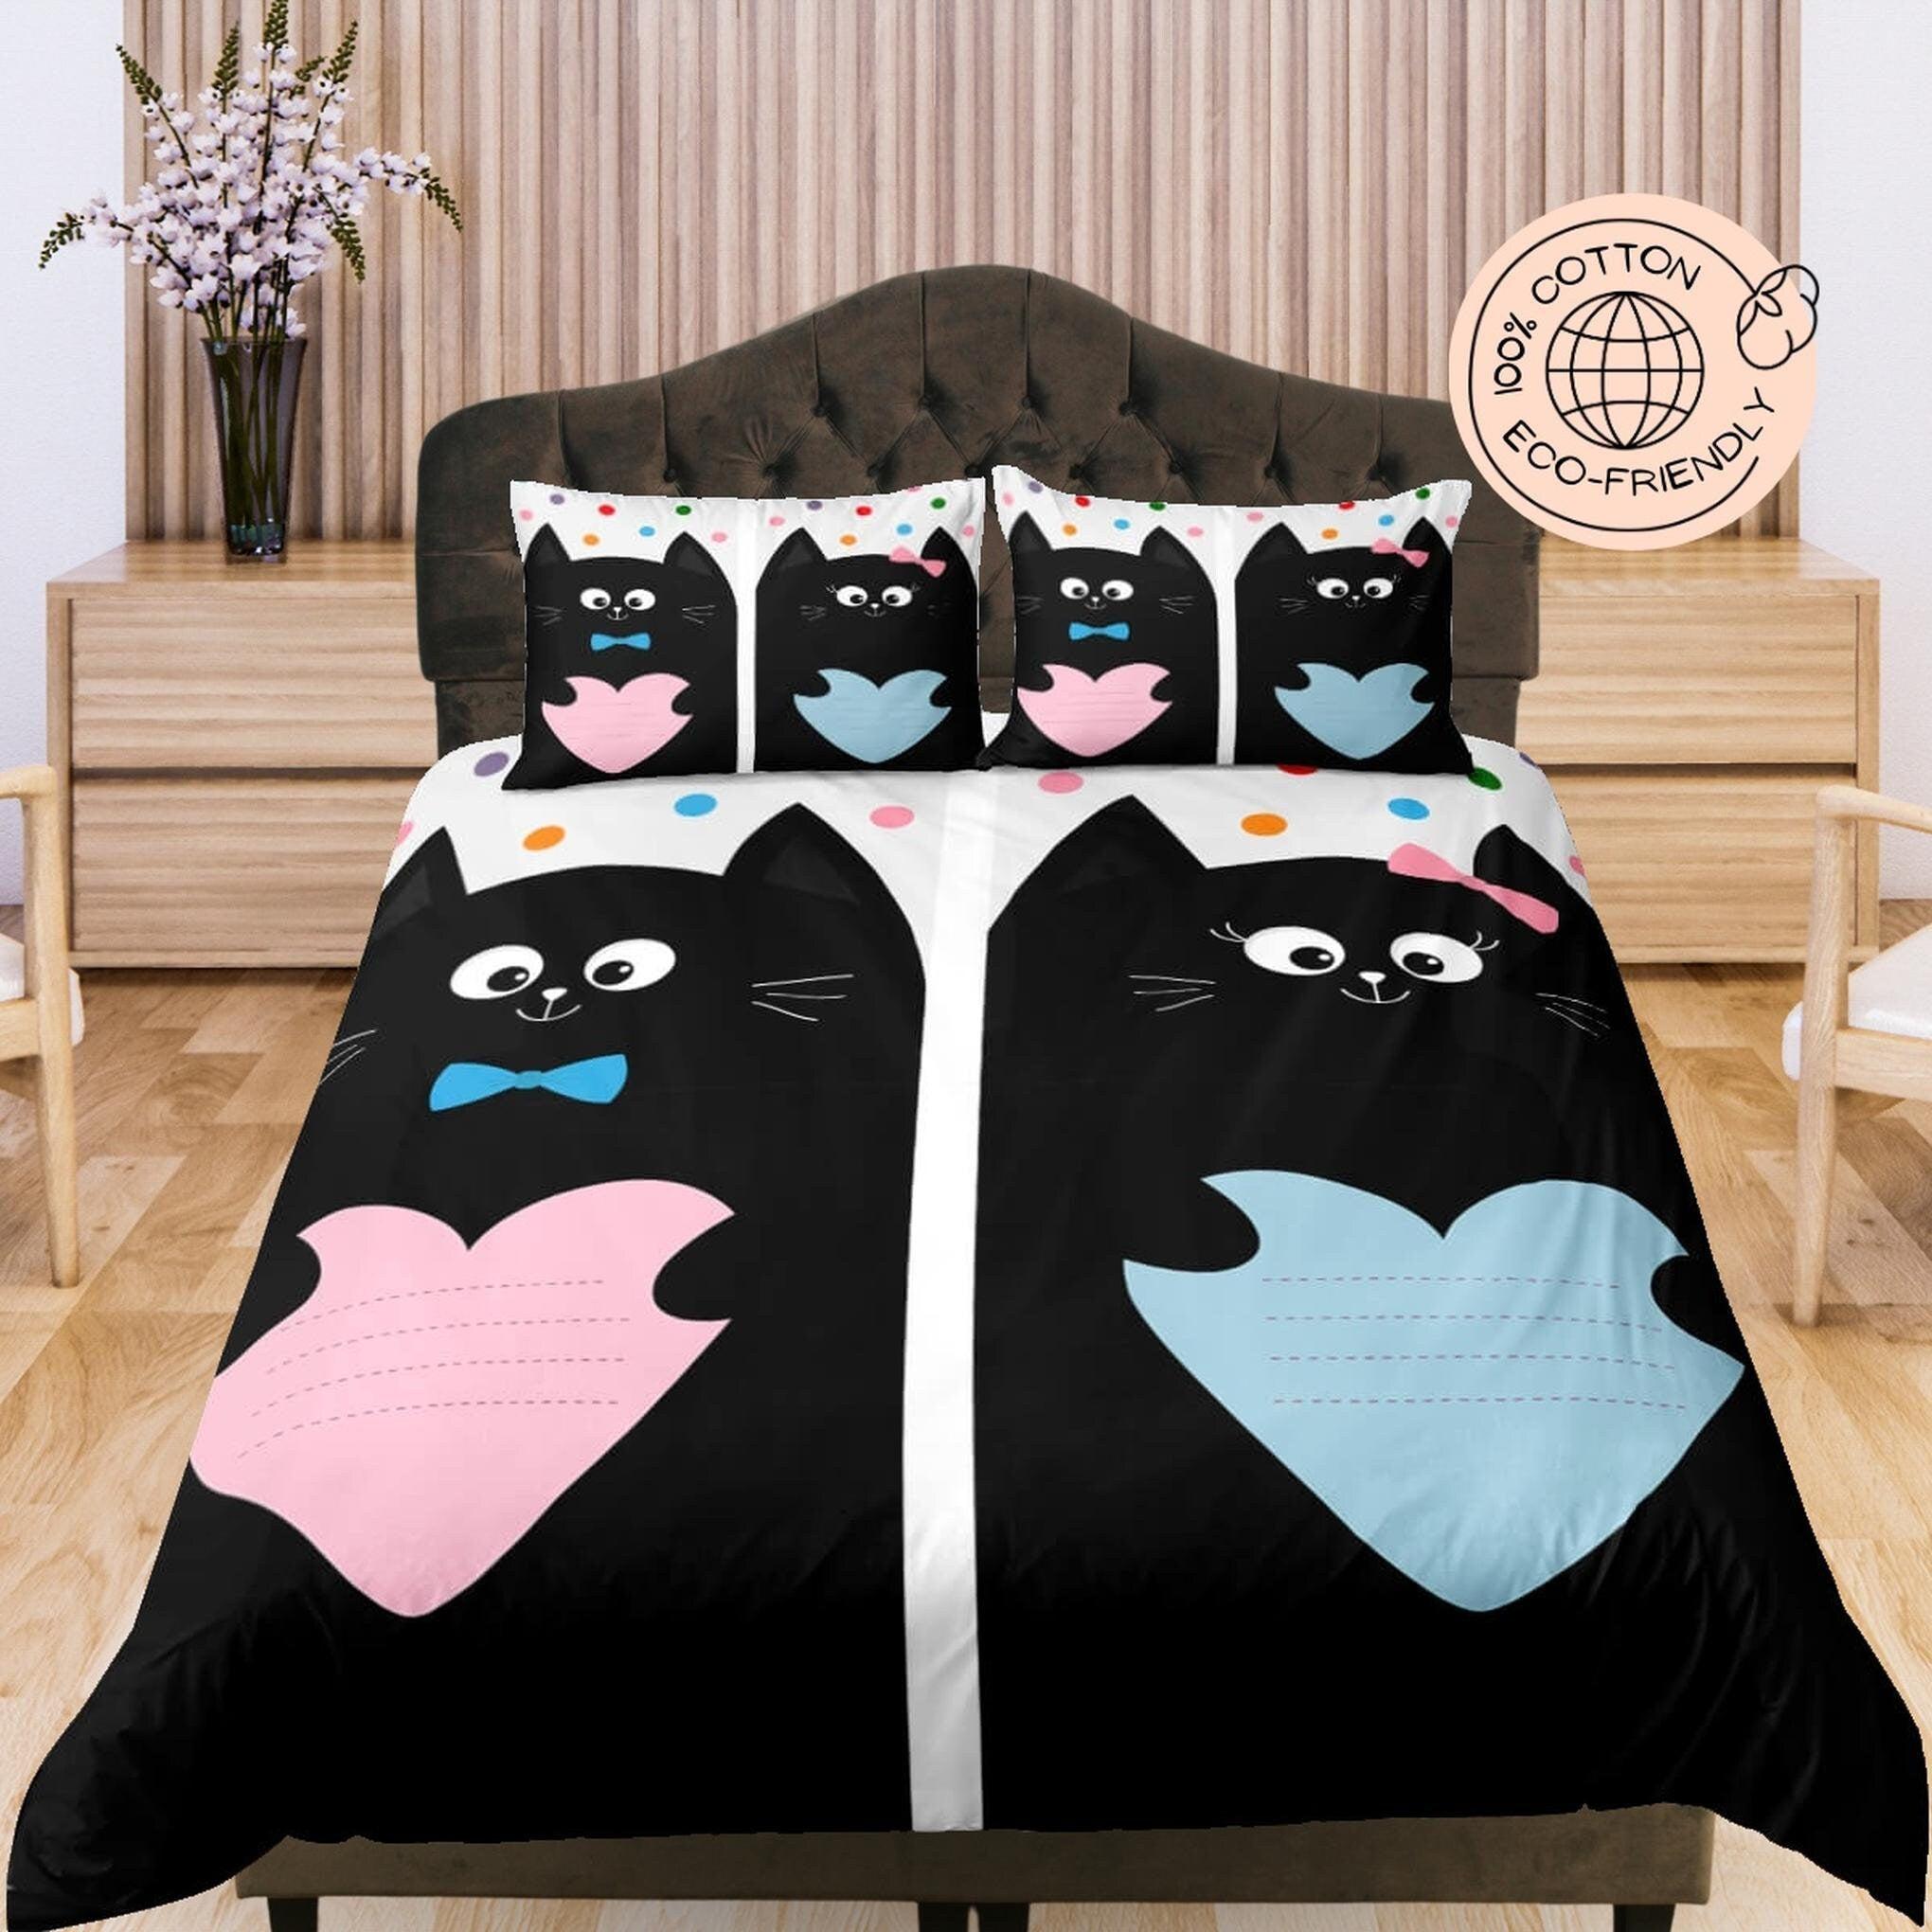 daintyduvet Cute Cats with Blue and Pink Hearts, Cotton Duvet Cover Set for Kids, Toddler Bedding, Baby Zipper Bedding, Nursery Bedding, Baby Shower